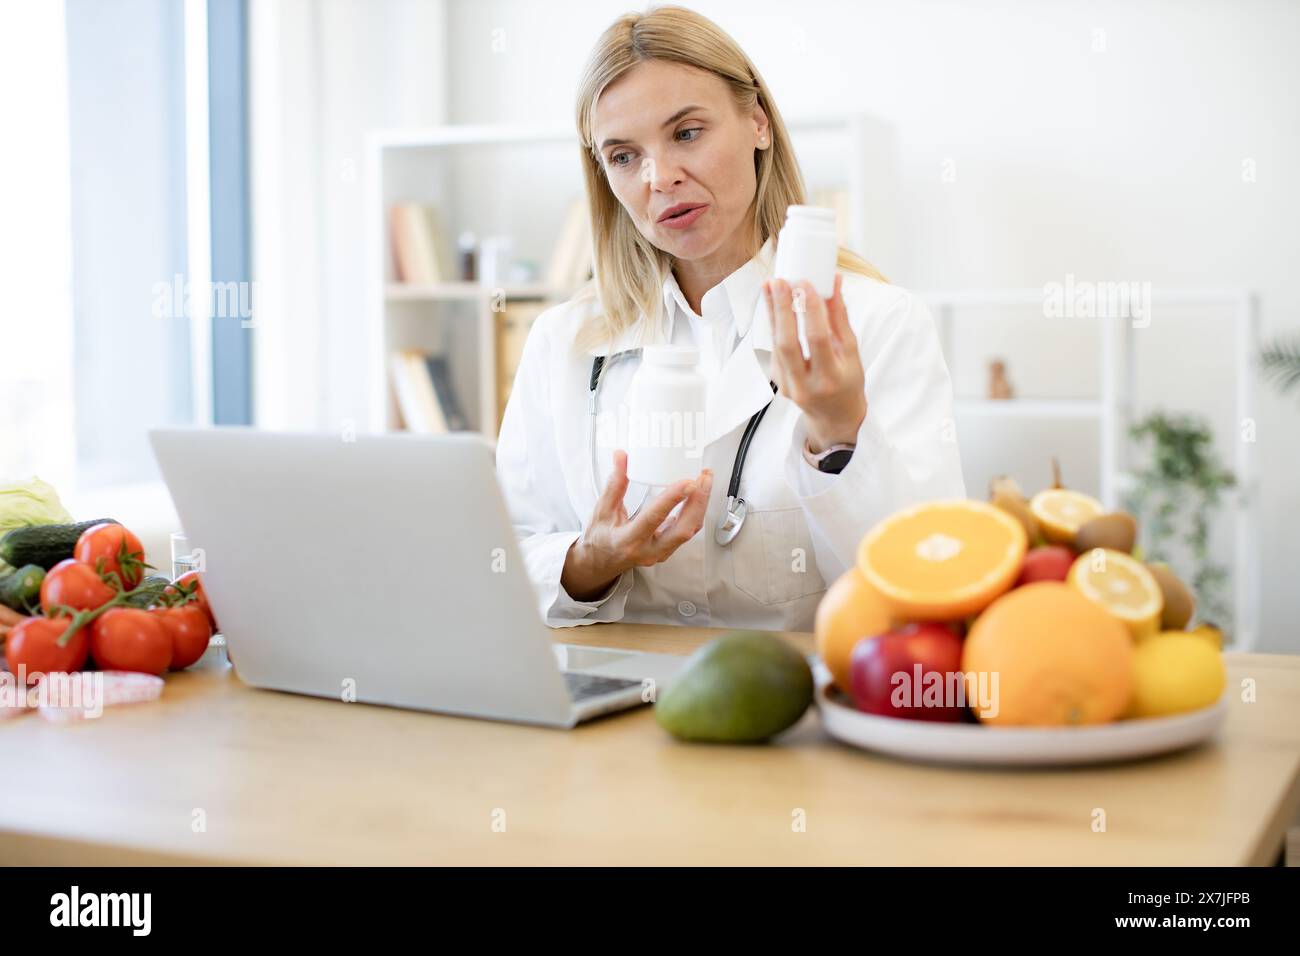 Telehealth and telemedicine concept. Mature nutritionist female doctor explaining medical treatment to the patient through a video conference using la Stock Photo